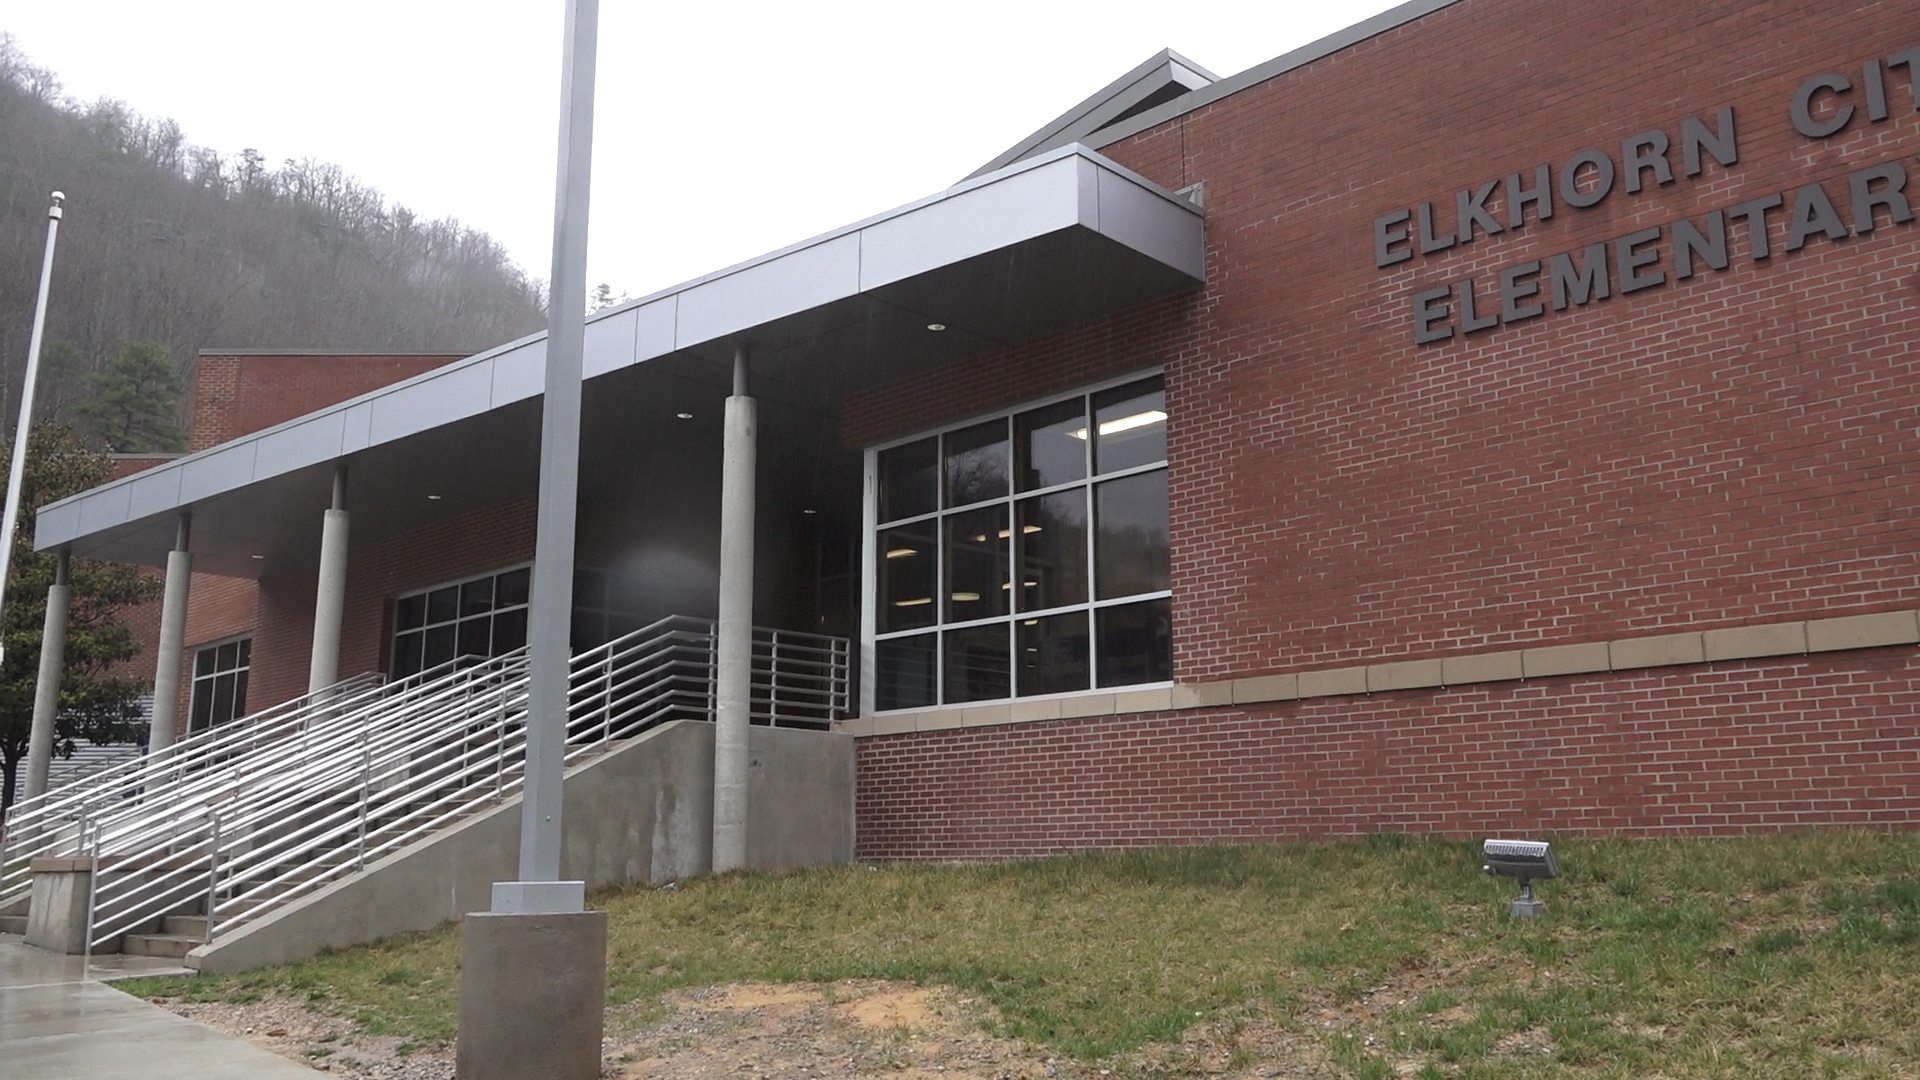 Confrontation between adults at Pike County elementary school leads to lockdown